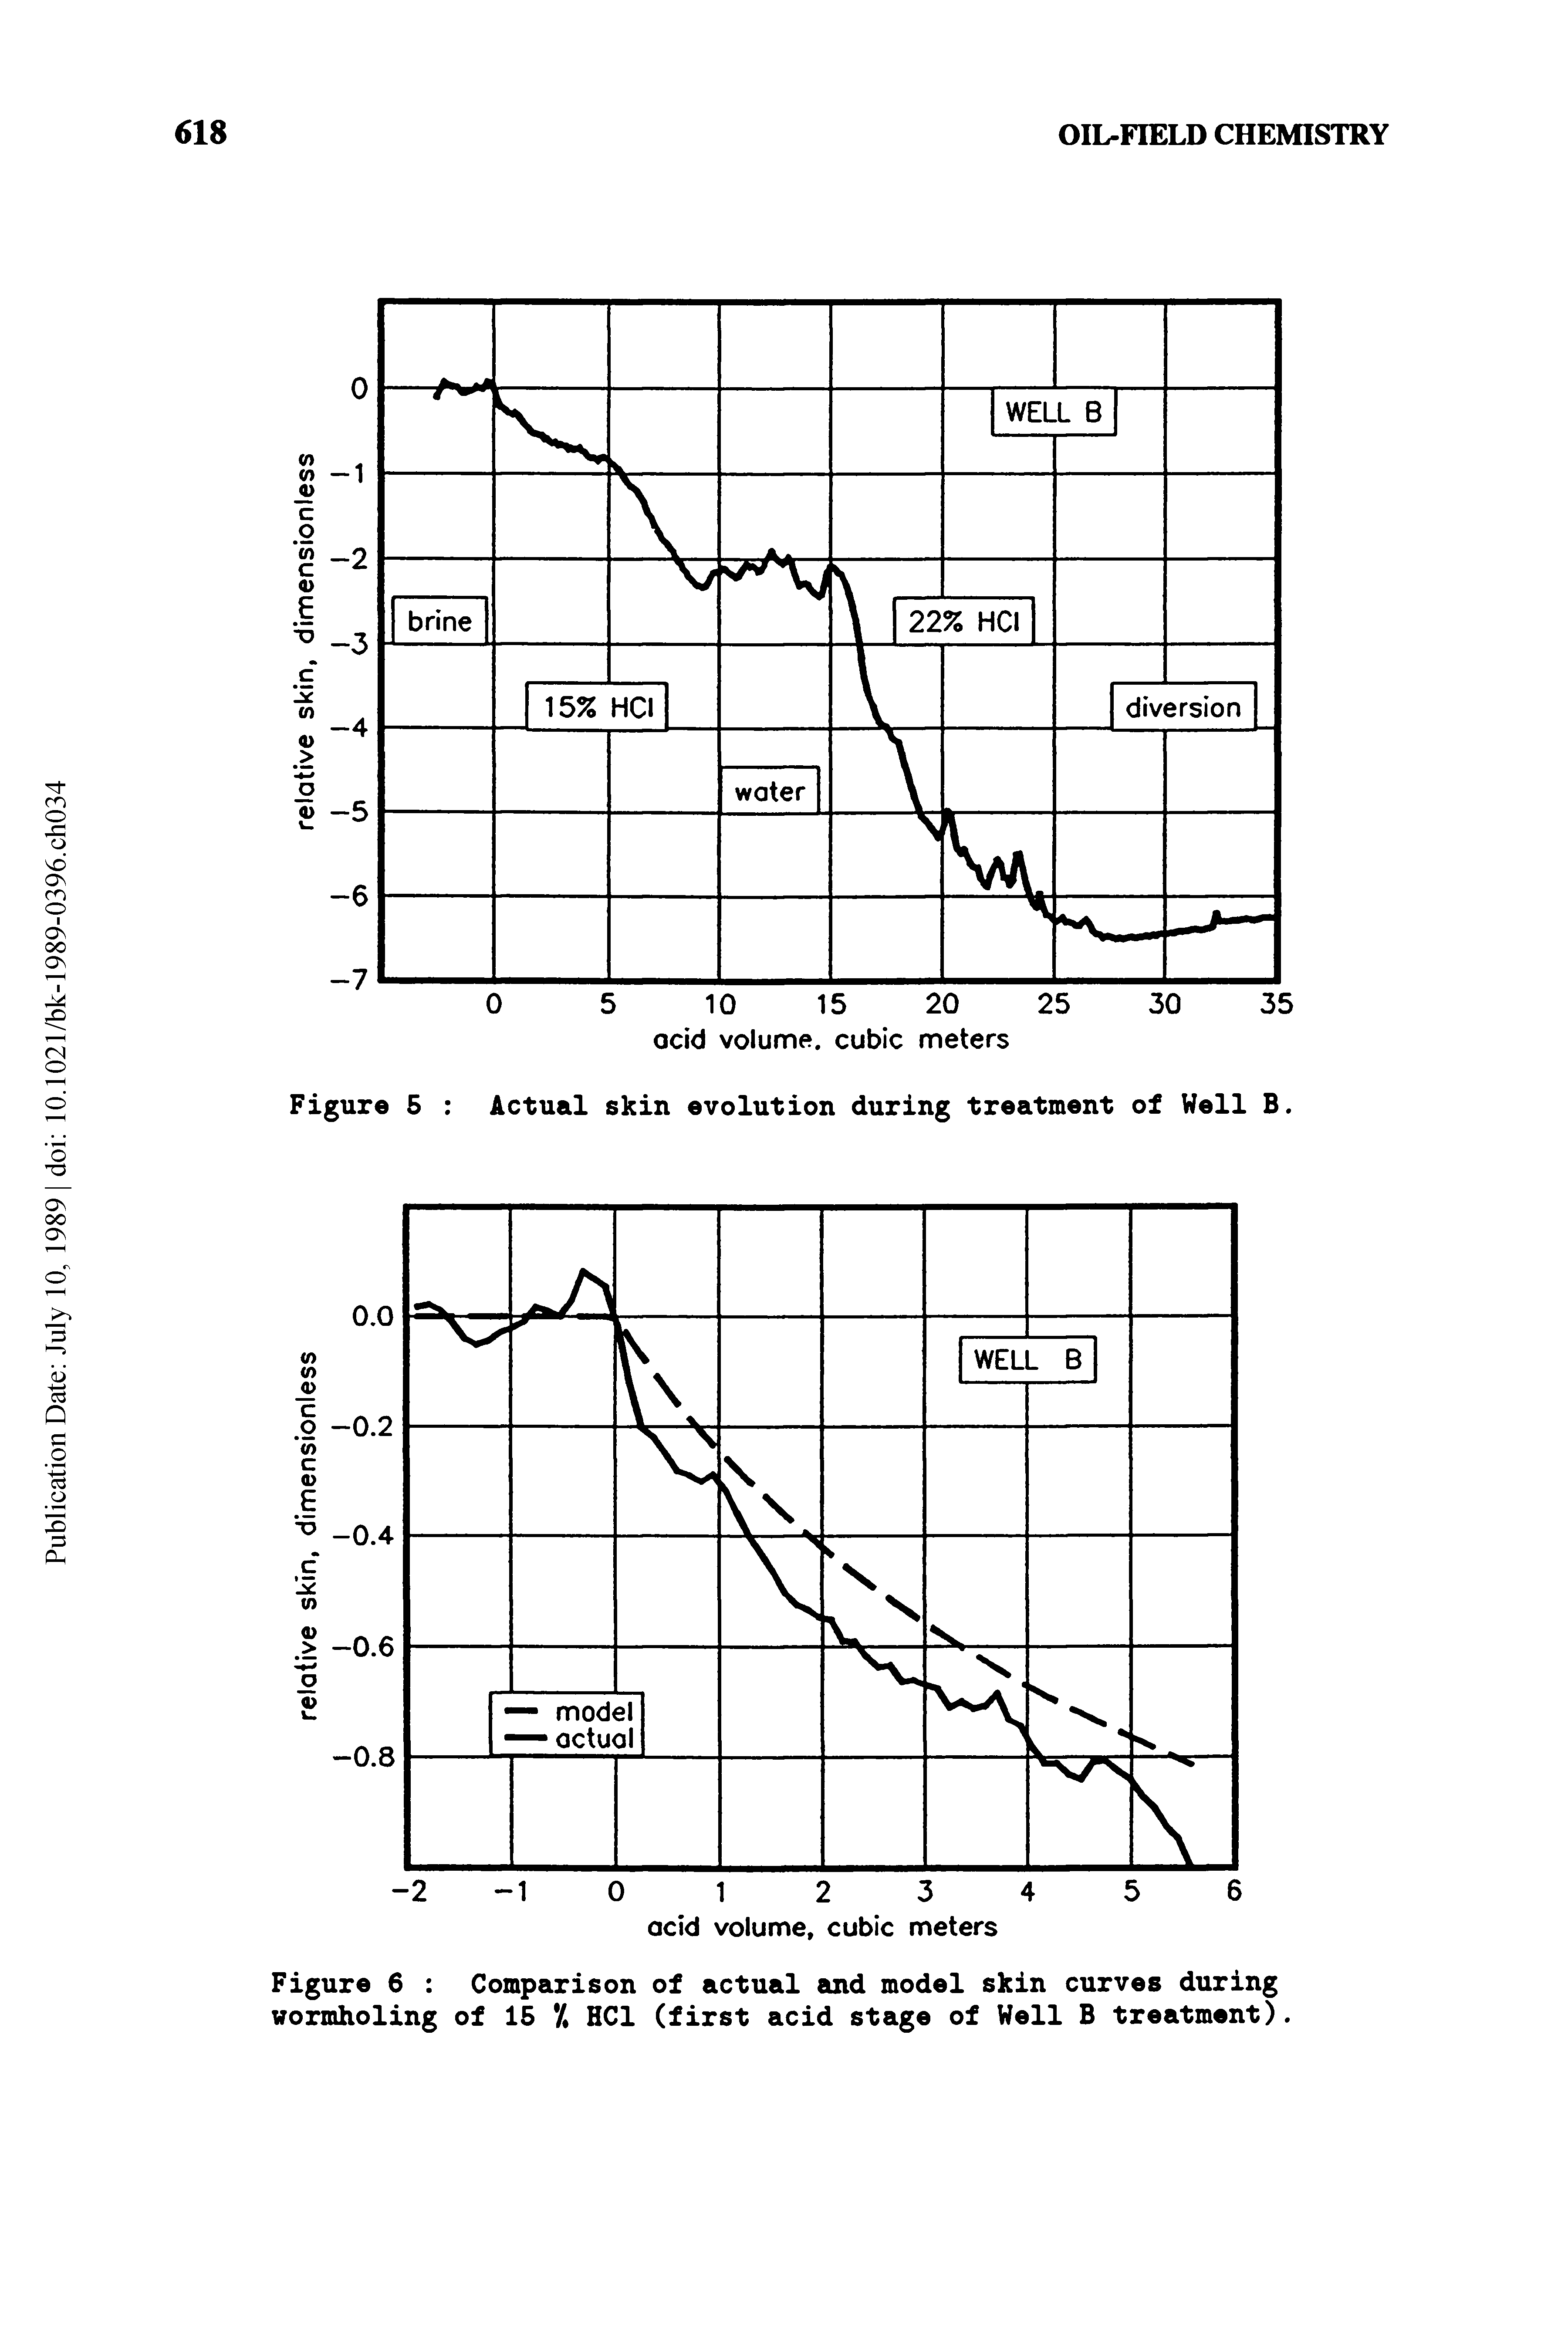 Figure 6 Comparison of actual and model skin curves during wormholing of 15 / HC1 (first acid stage of Well B treatment).